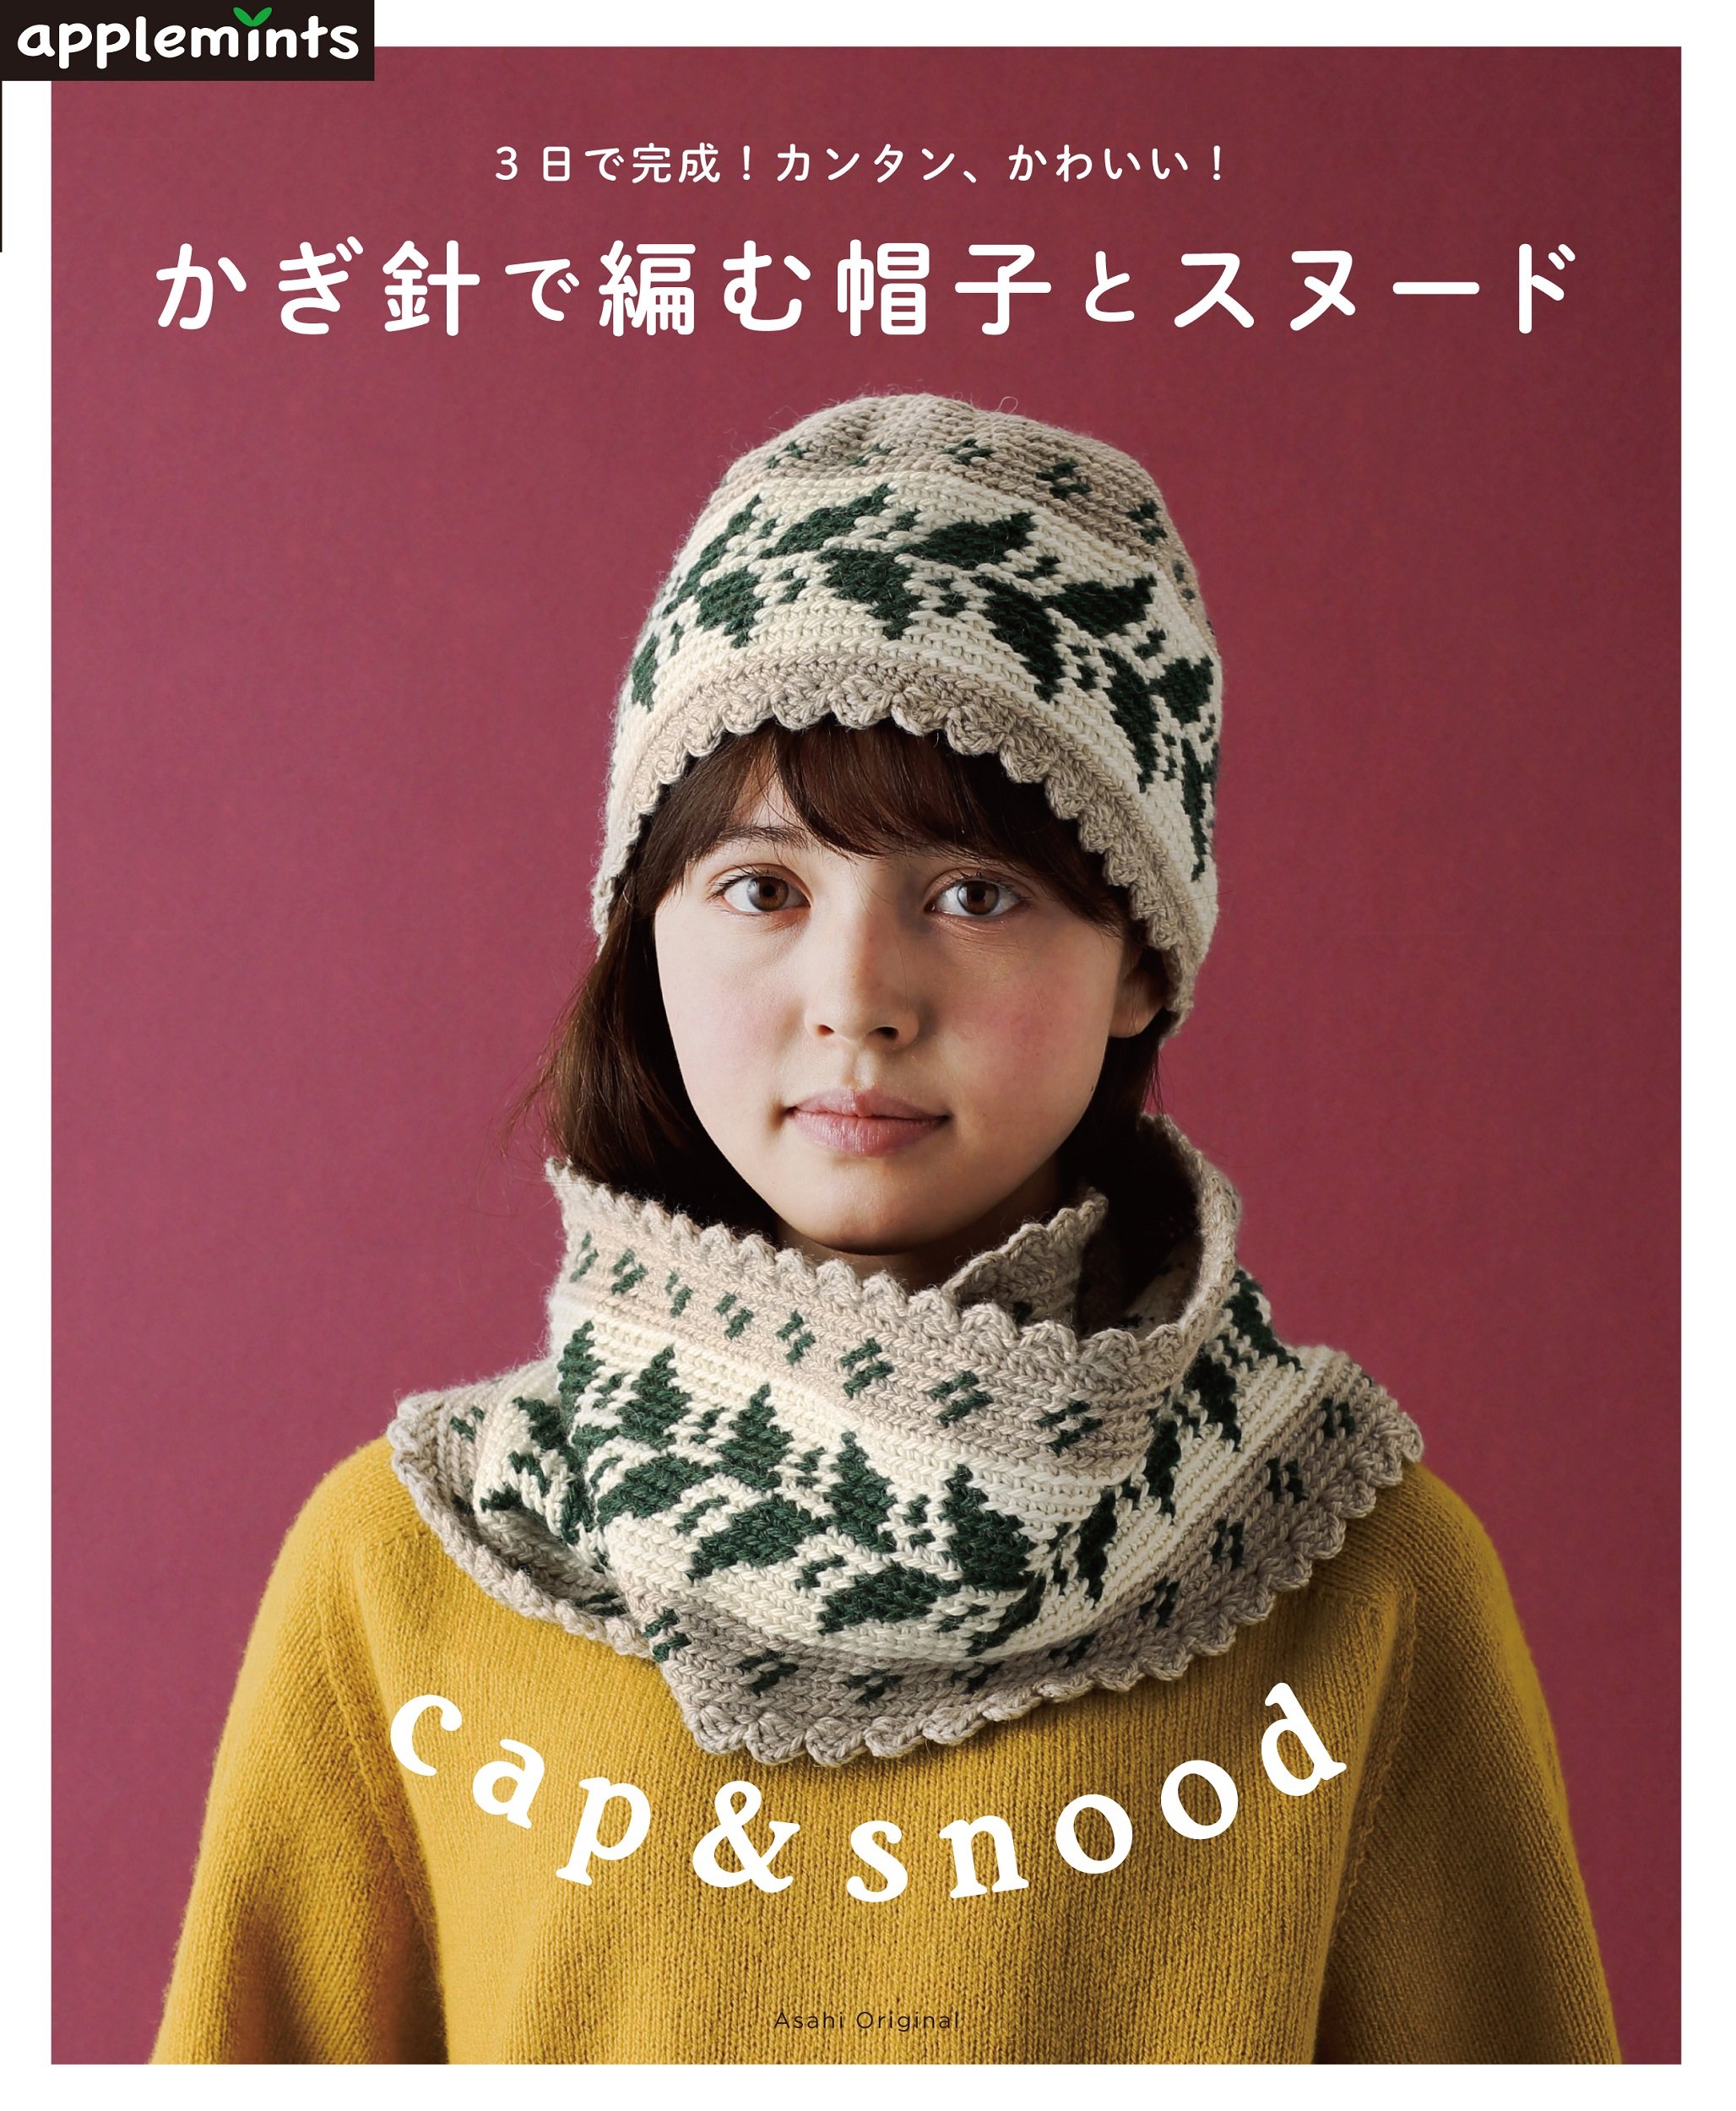 Easy cute knit crocheted hat and snood